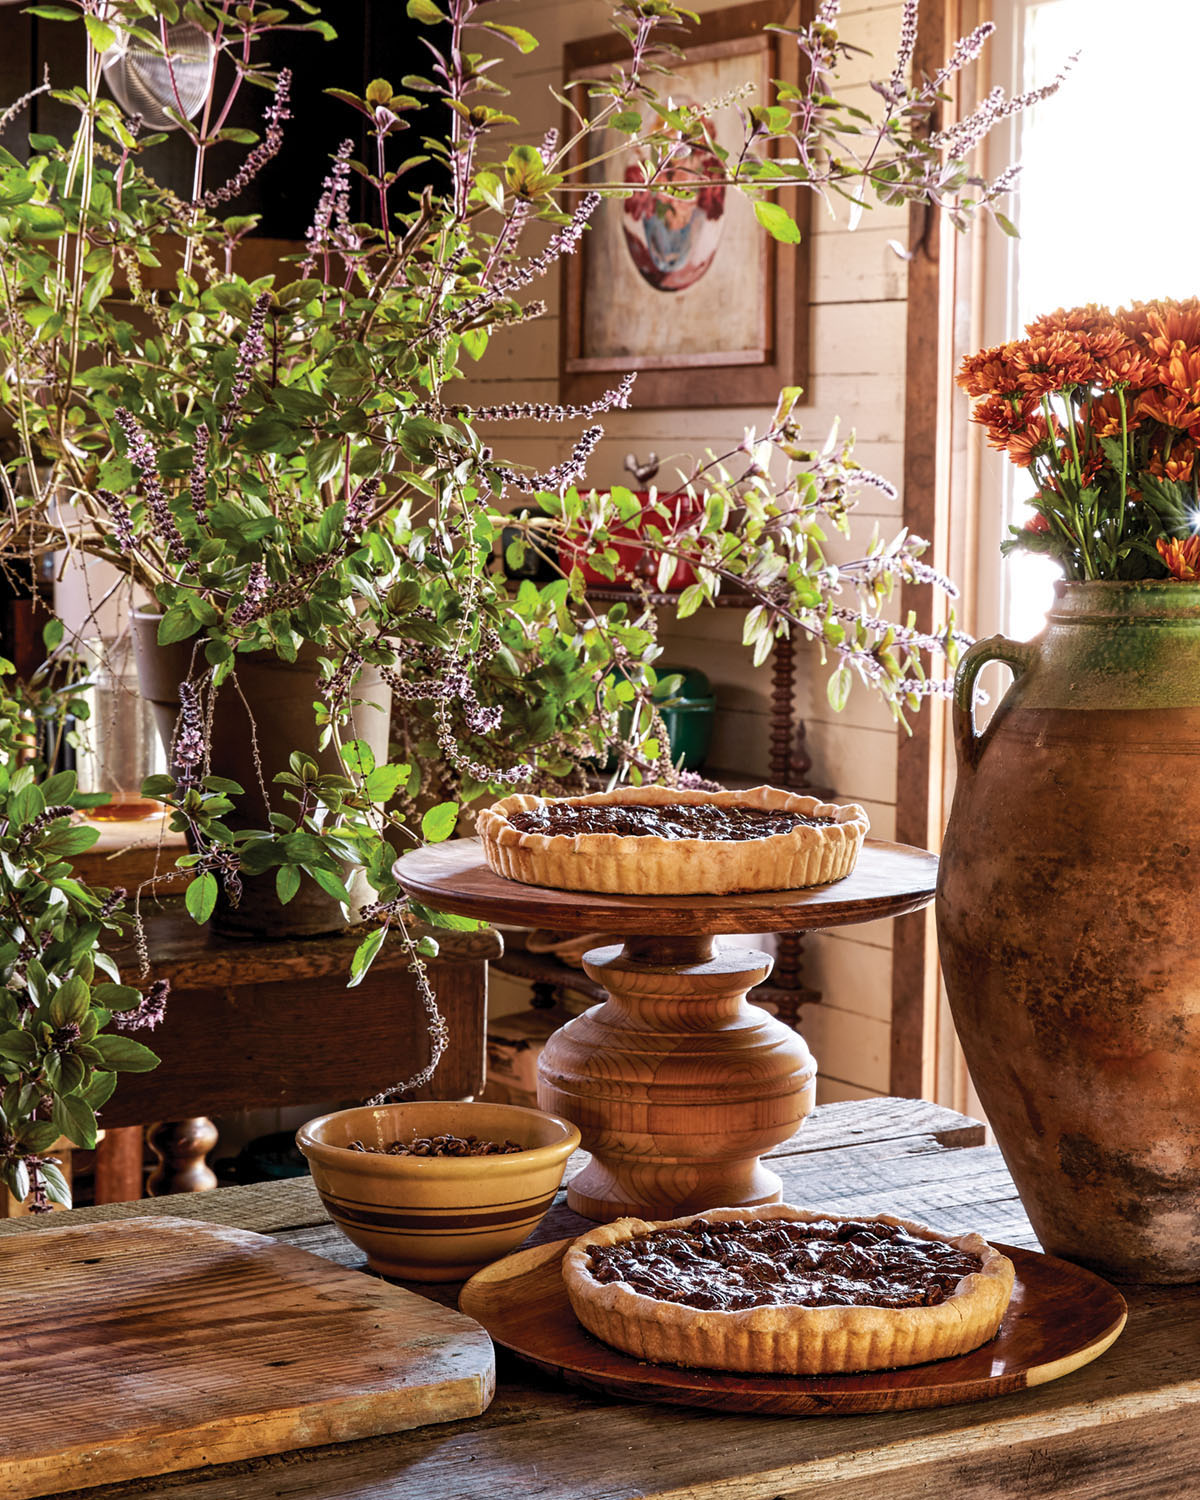 Keith Robinson's fall party spread features a large, wild arrangement of flowering branches, a tall terra cotta pot filled with mums, and rustic fruit pies